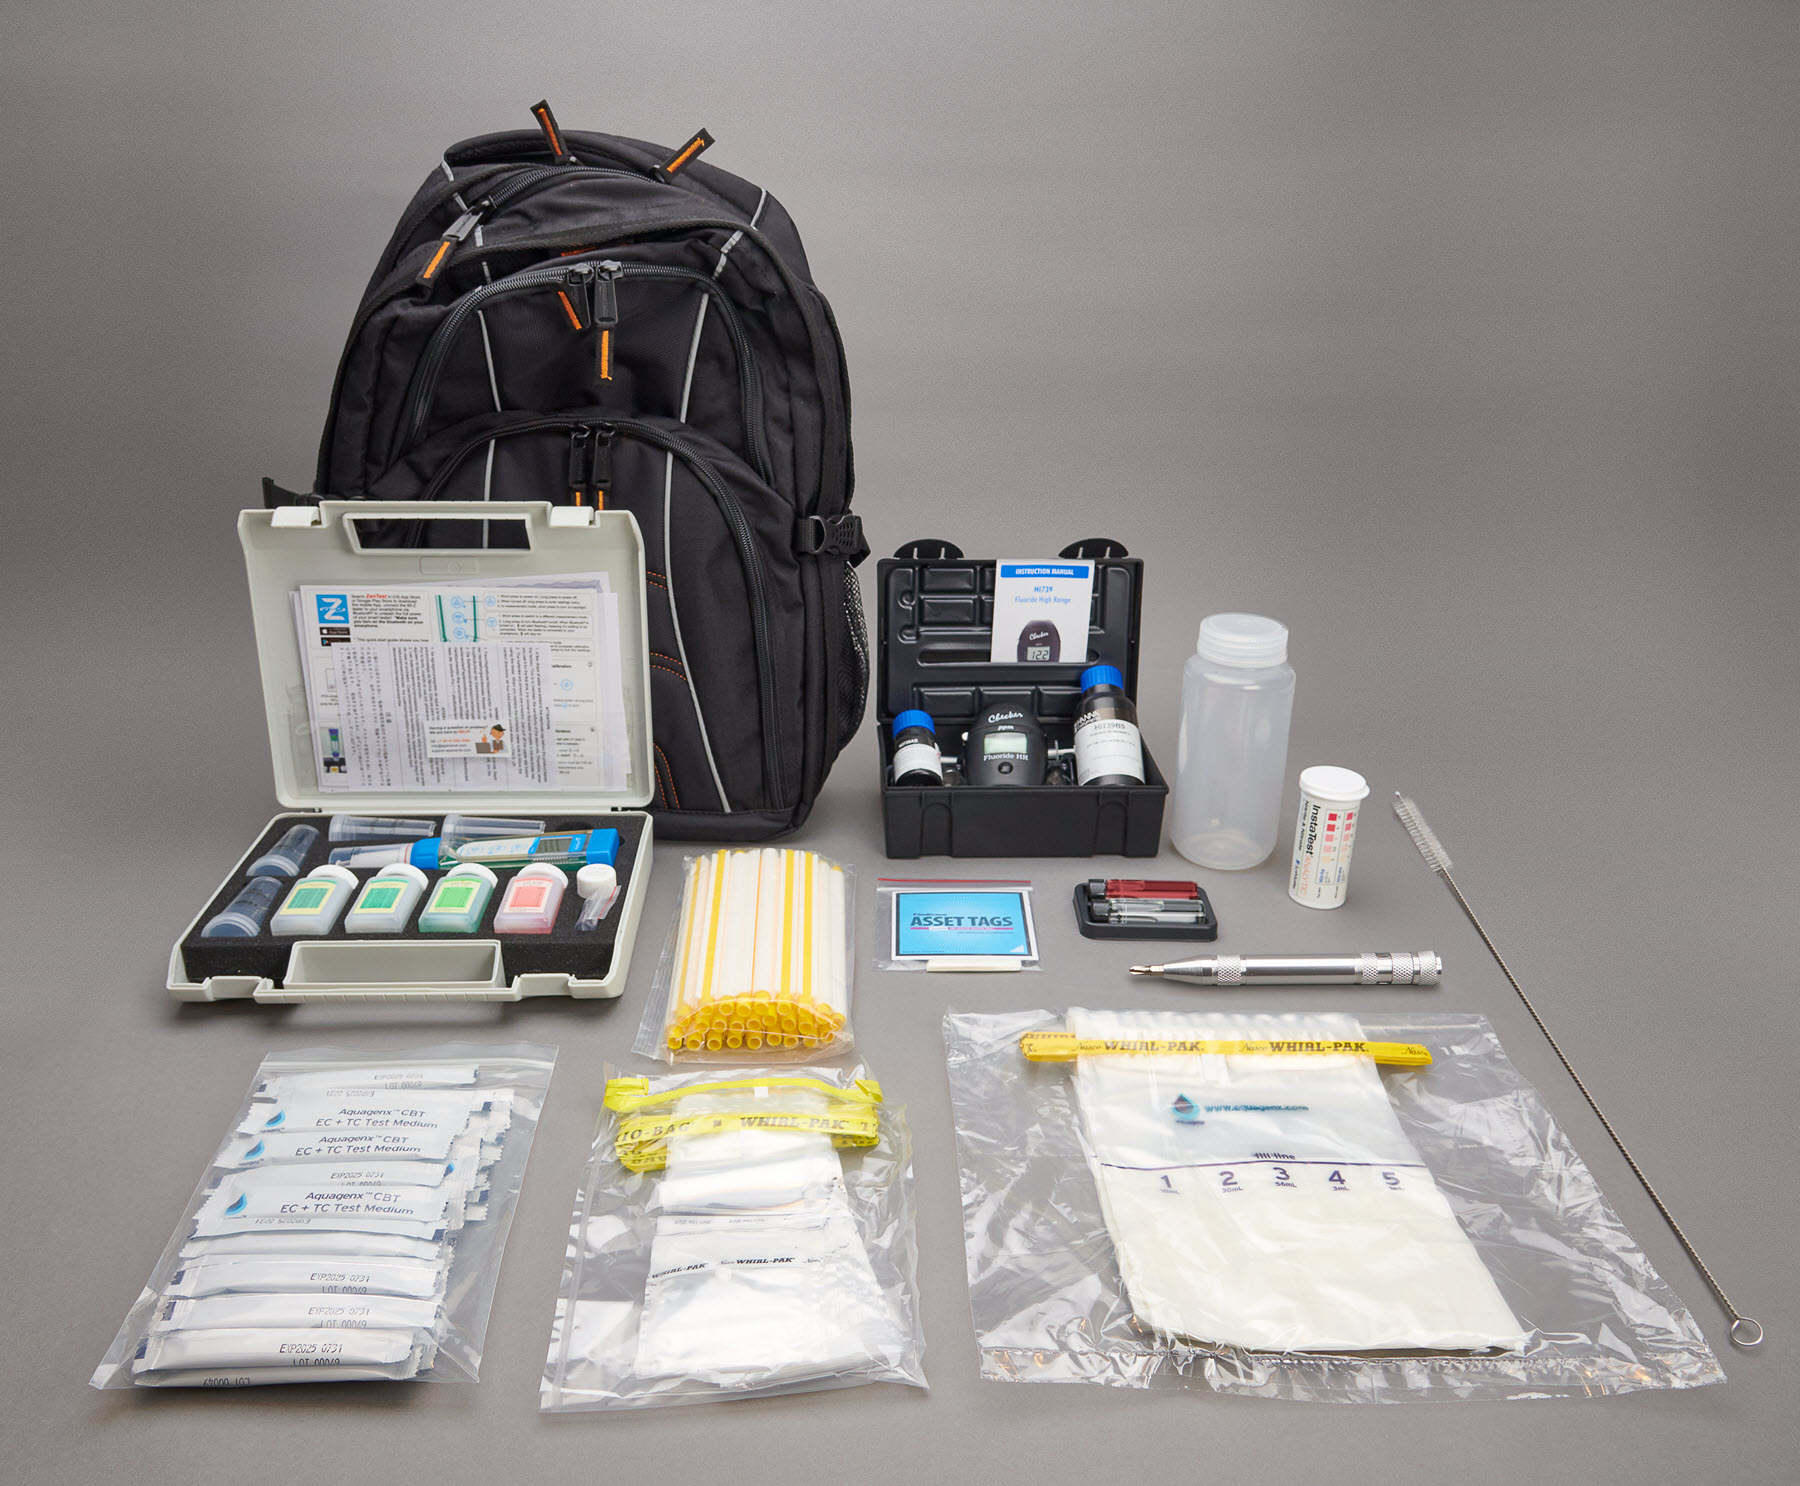 Components in Aquagenx Core CBT Field Kit for microbial and chemical testing